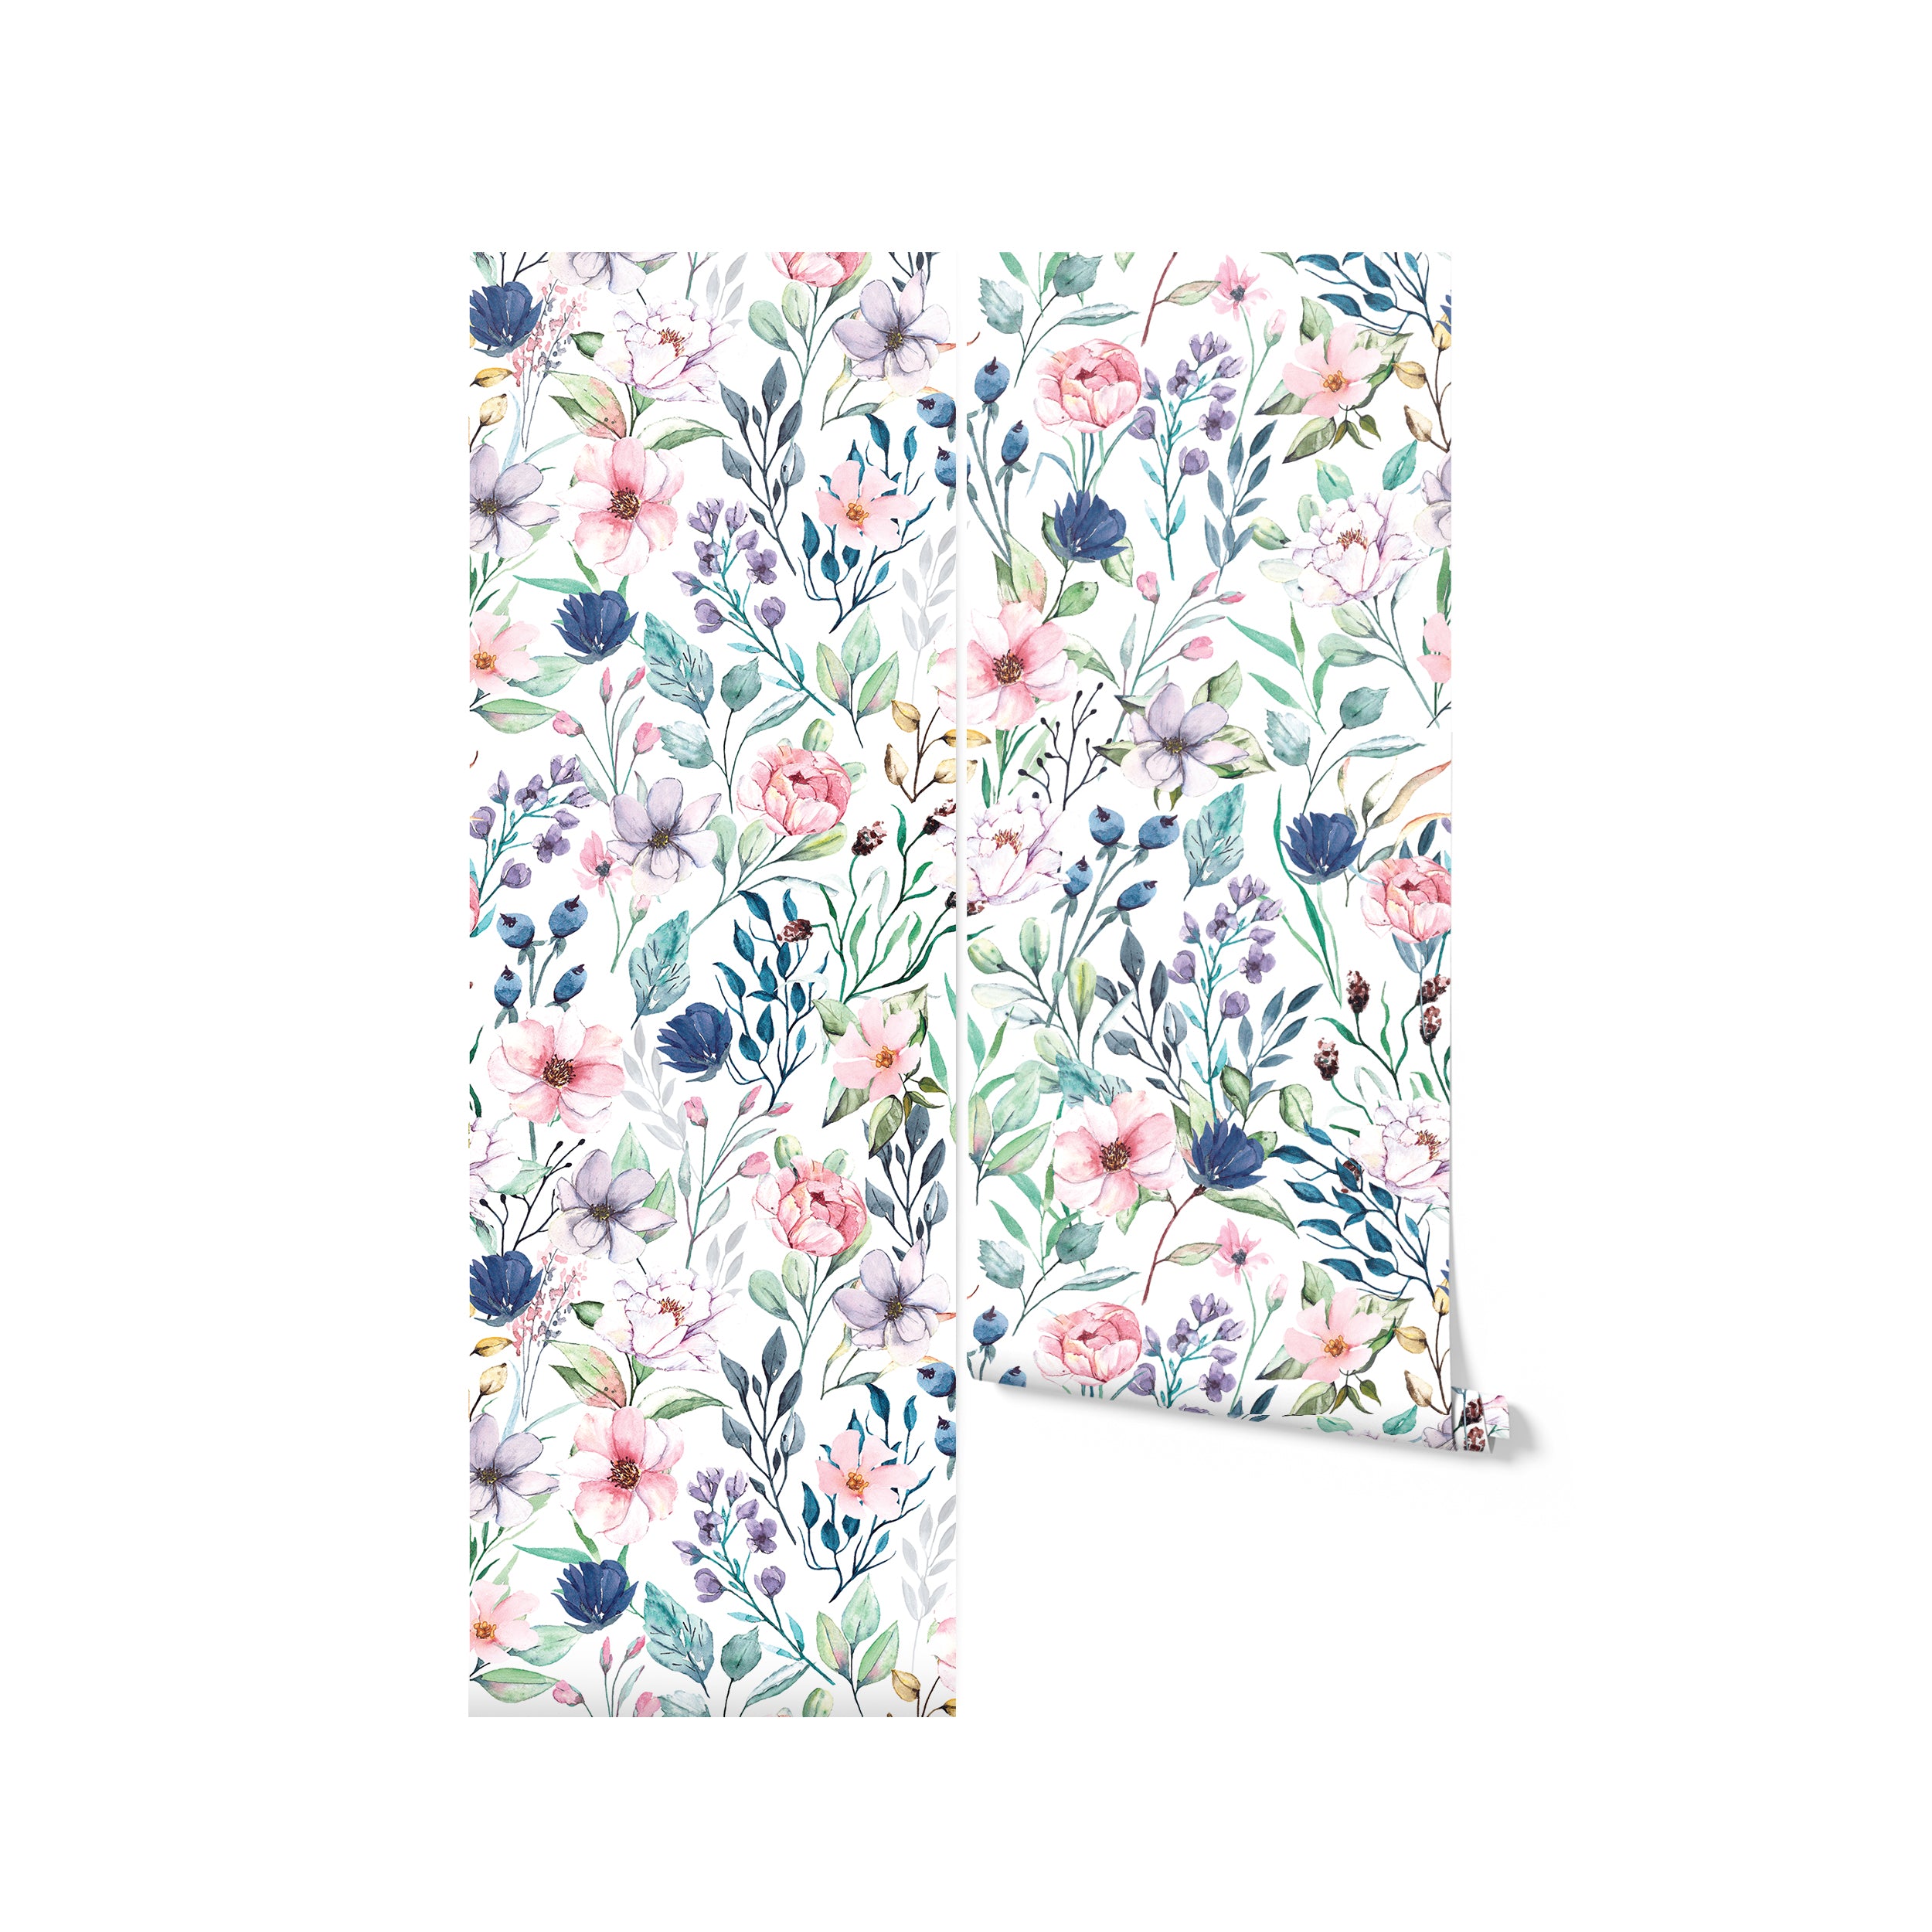 A roll of Watercolor Floral Wallpaper IV showing off its medium-sized, hand-painted-style flowers, ready to transform any room with its colorful and lively design.